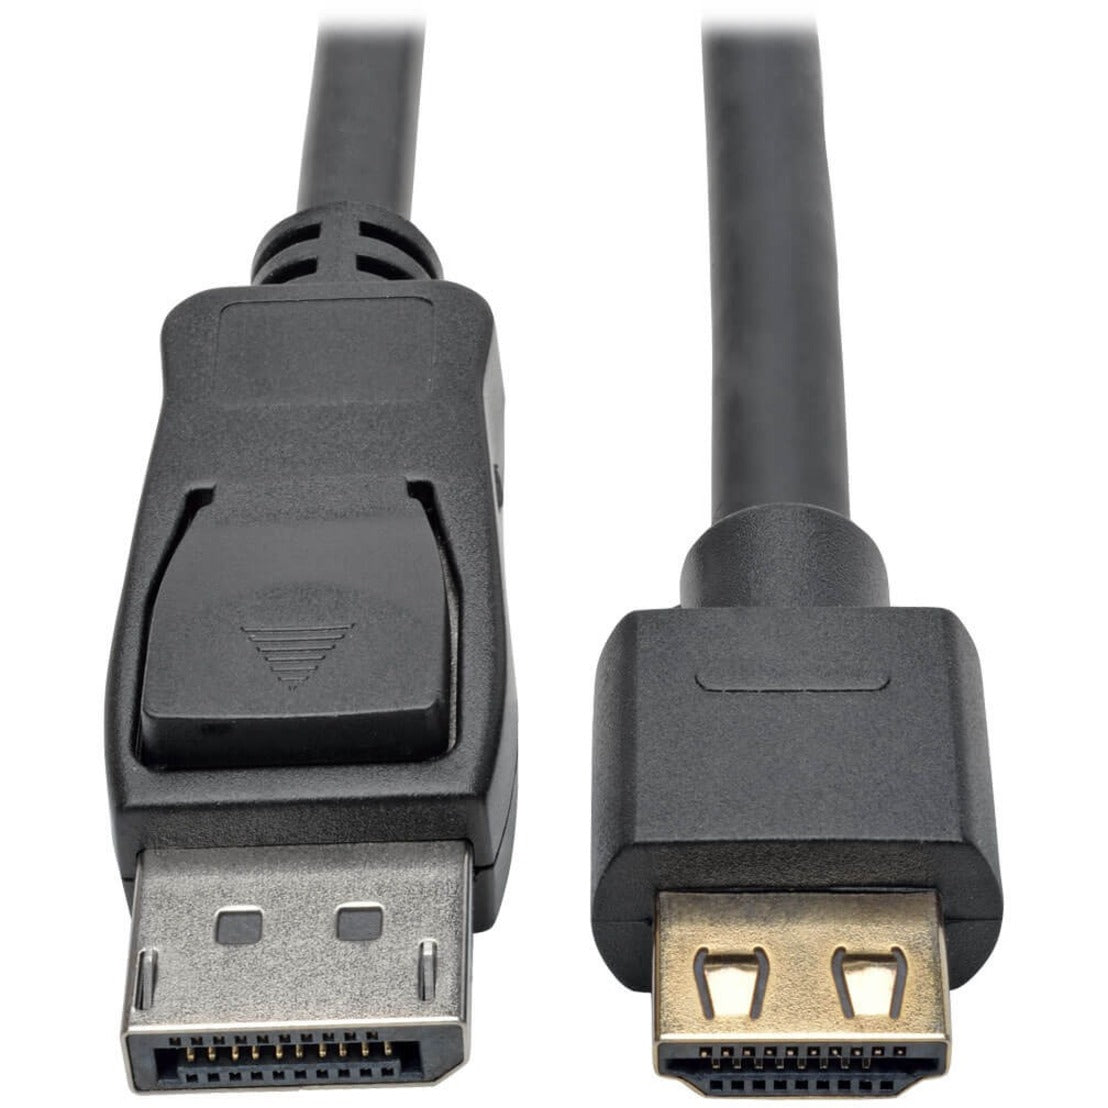 Tripp Lite P582-006-HD-V2A DisplayPort 1.2a to HDMI Active Adapter Cable (M/M), 6 ft.